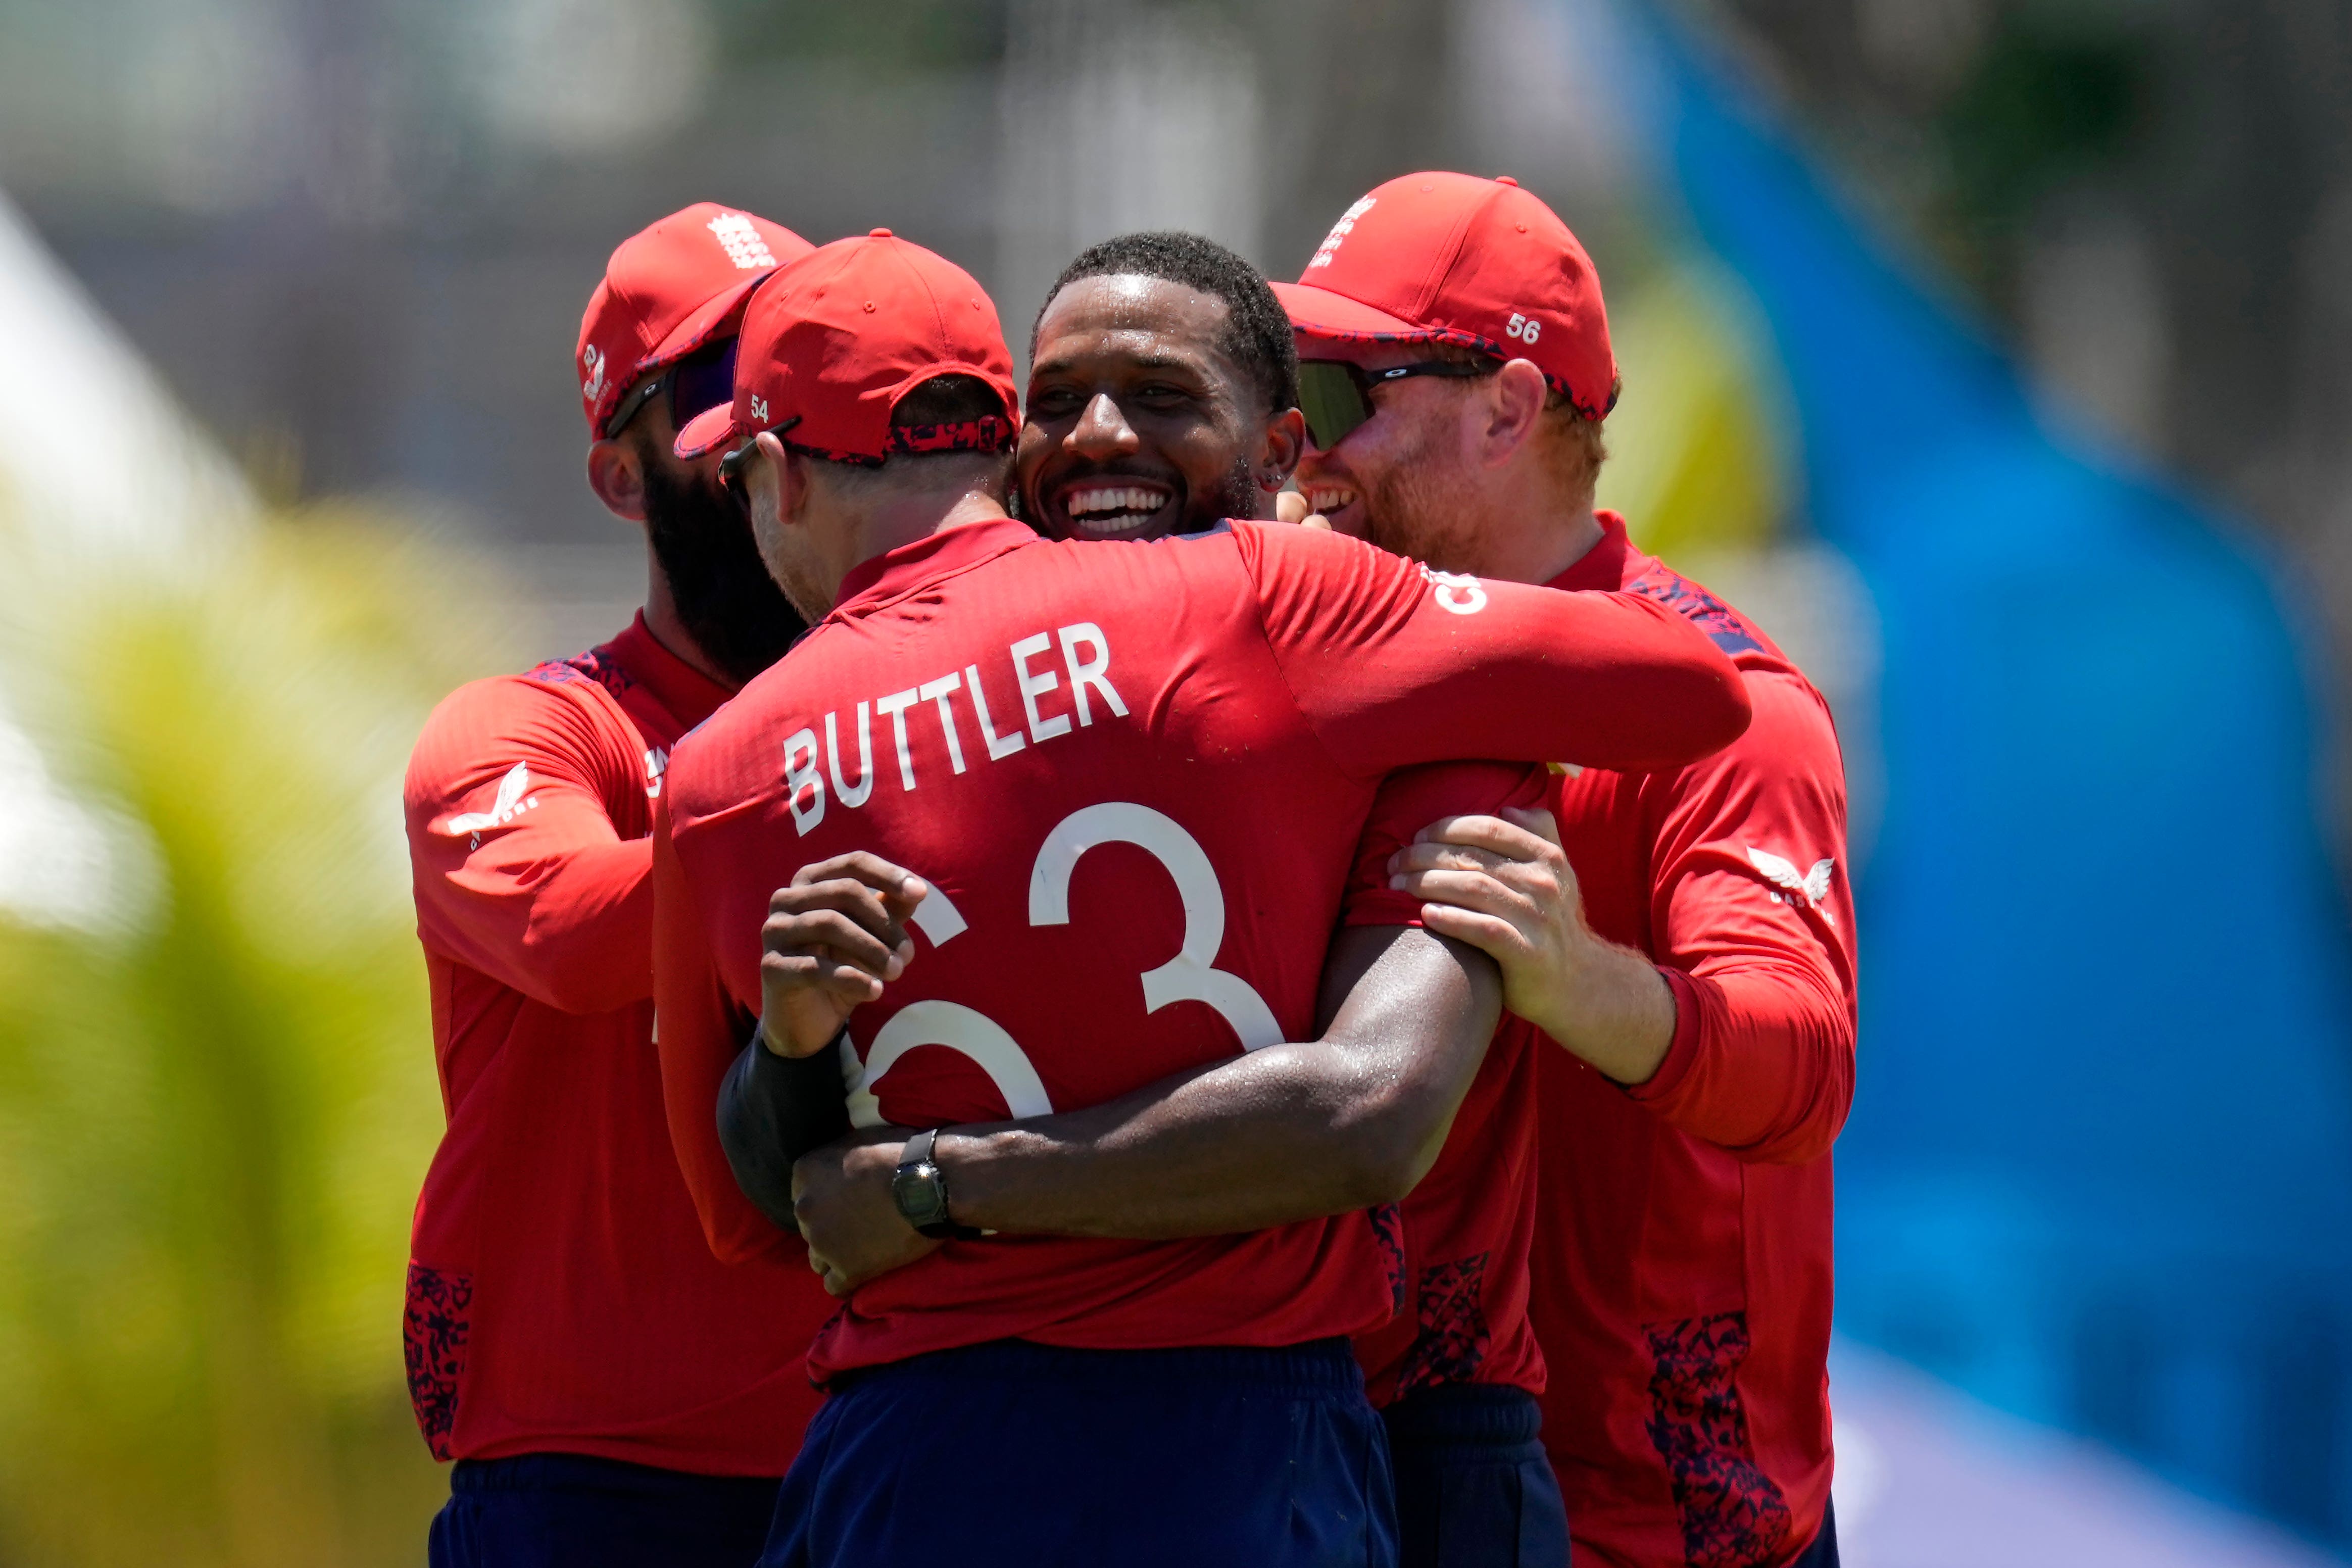 Chris Jordan was congratulated for a scintillating hat-trick